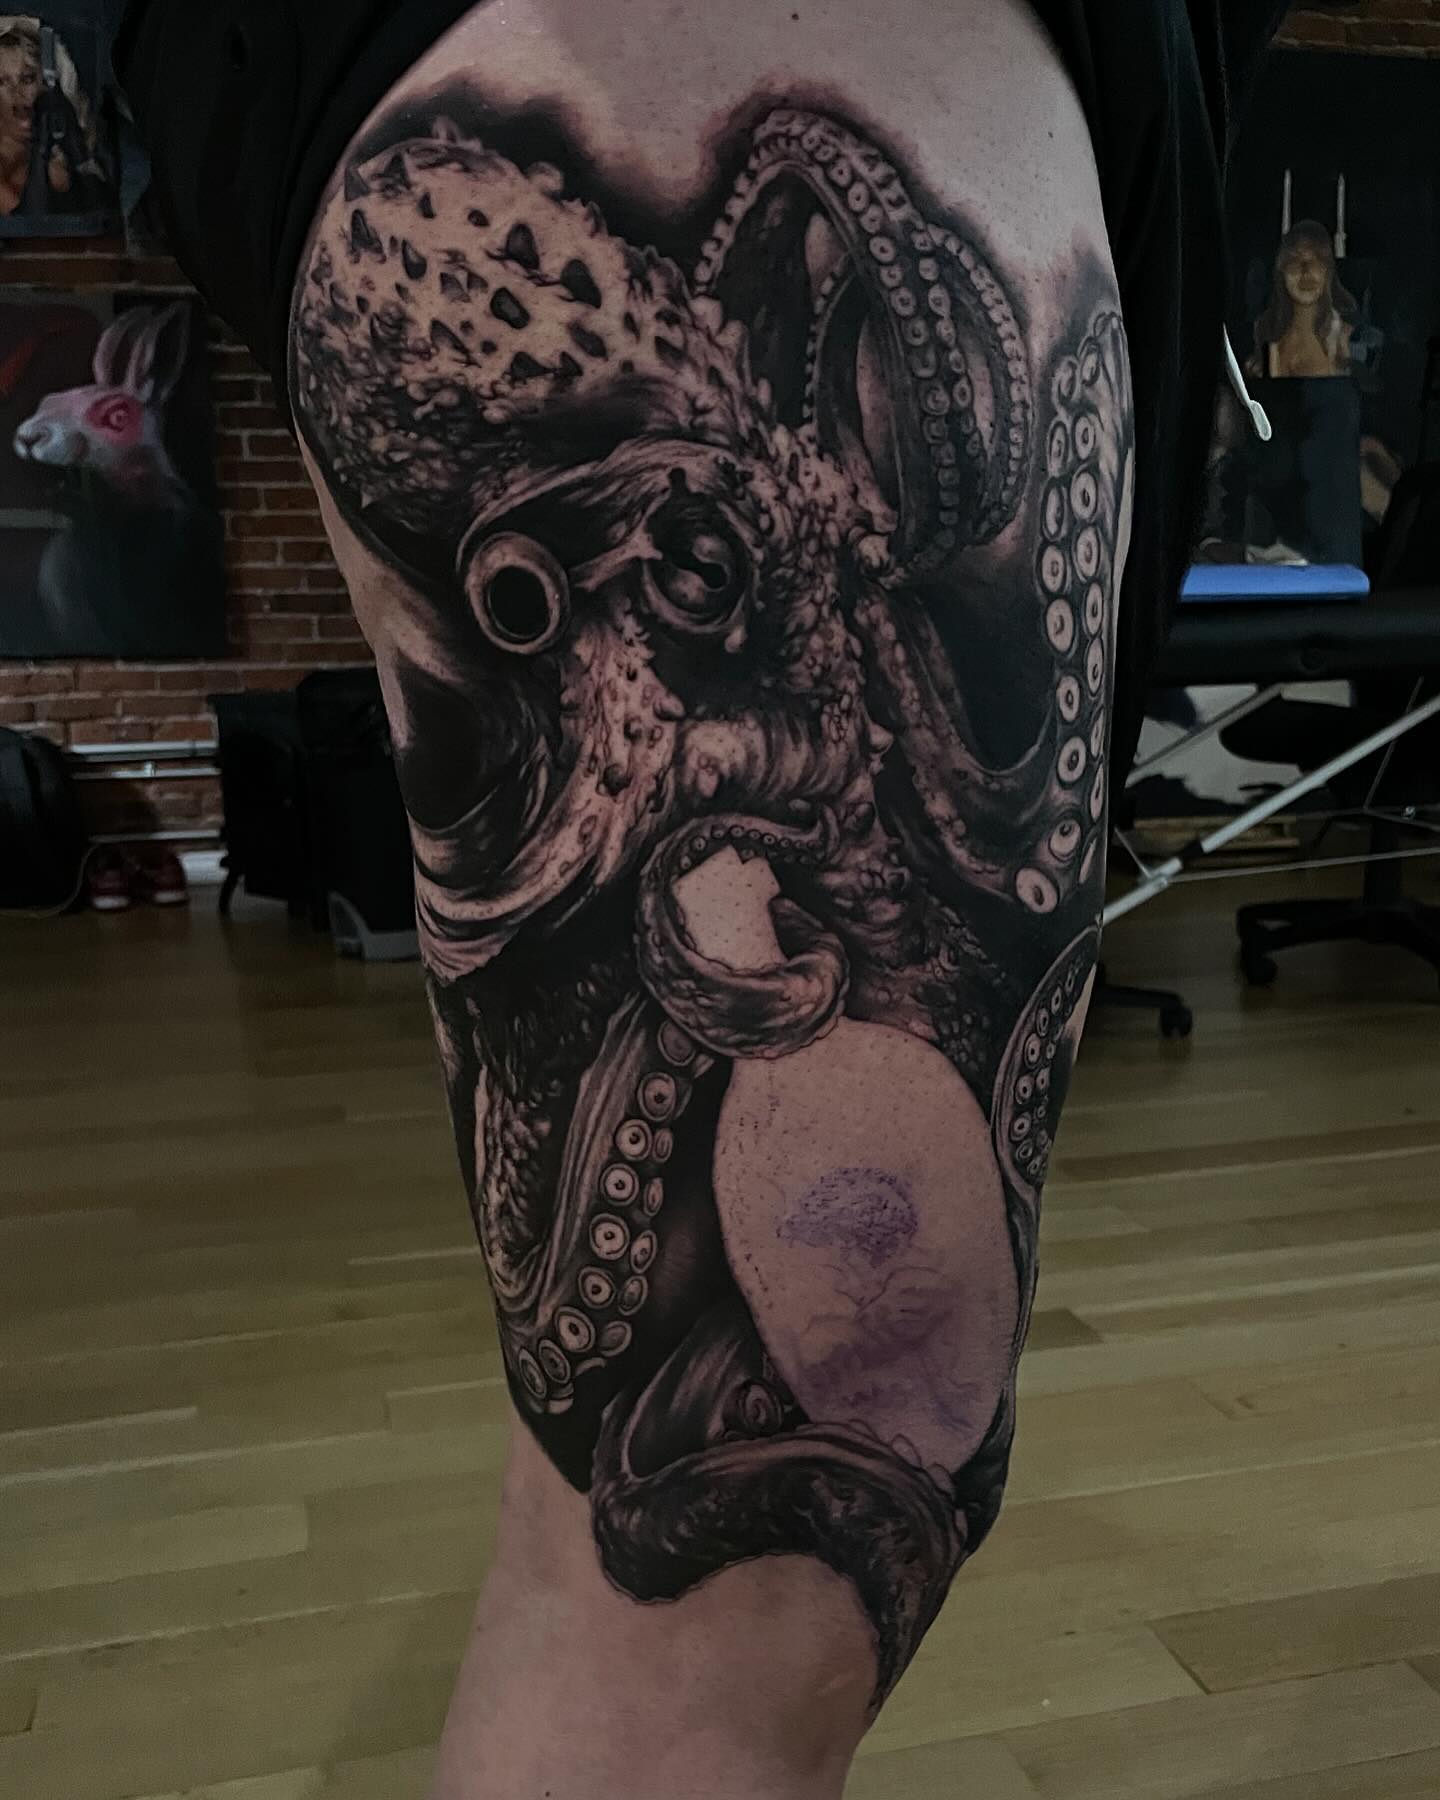 Thanks Luke 🐙!
Beginning of an underwater leg sleeve, this part took about 10h. 
Done at @lovemoretattoo 
#octopustattoo #underwatertattoo #vancouver #vancouvertattoo #vancouvertattooartist #vancouvertattoos #gastown #gastownvancouver #lovemoretattoo #vancouverbc #britishcolumbia